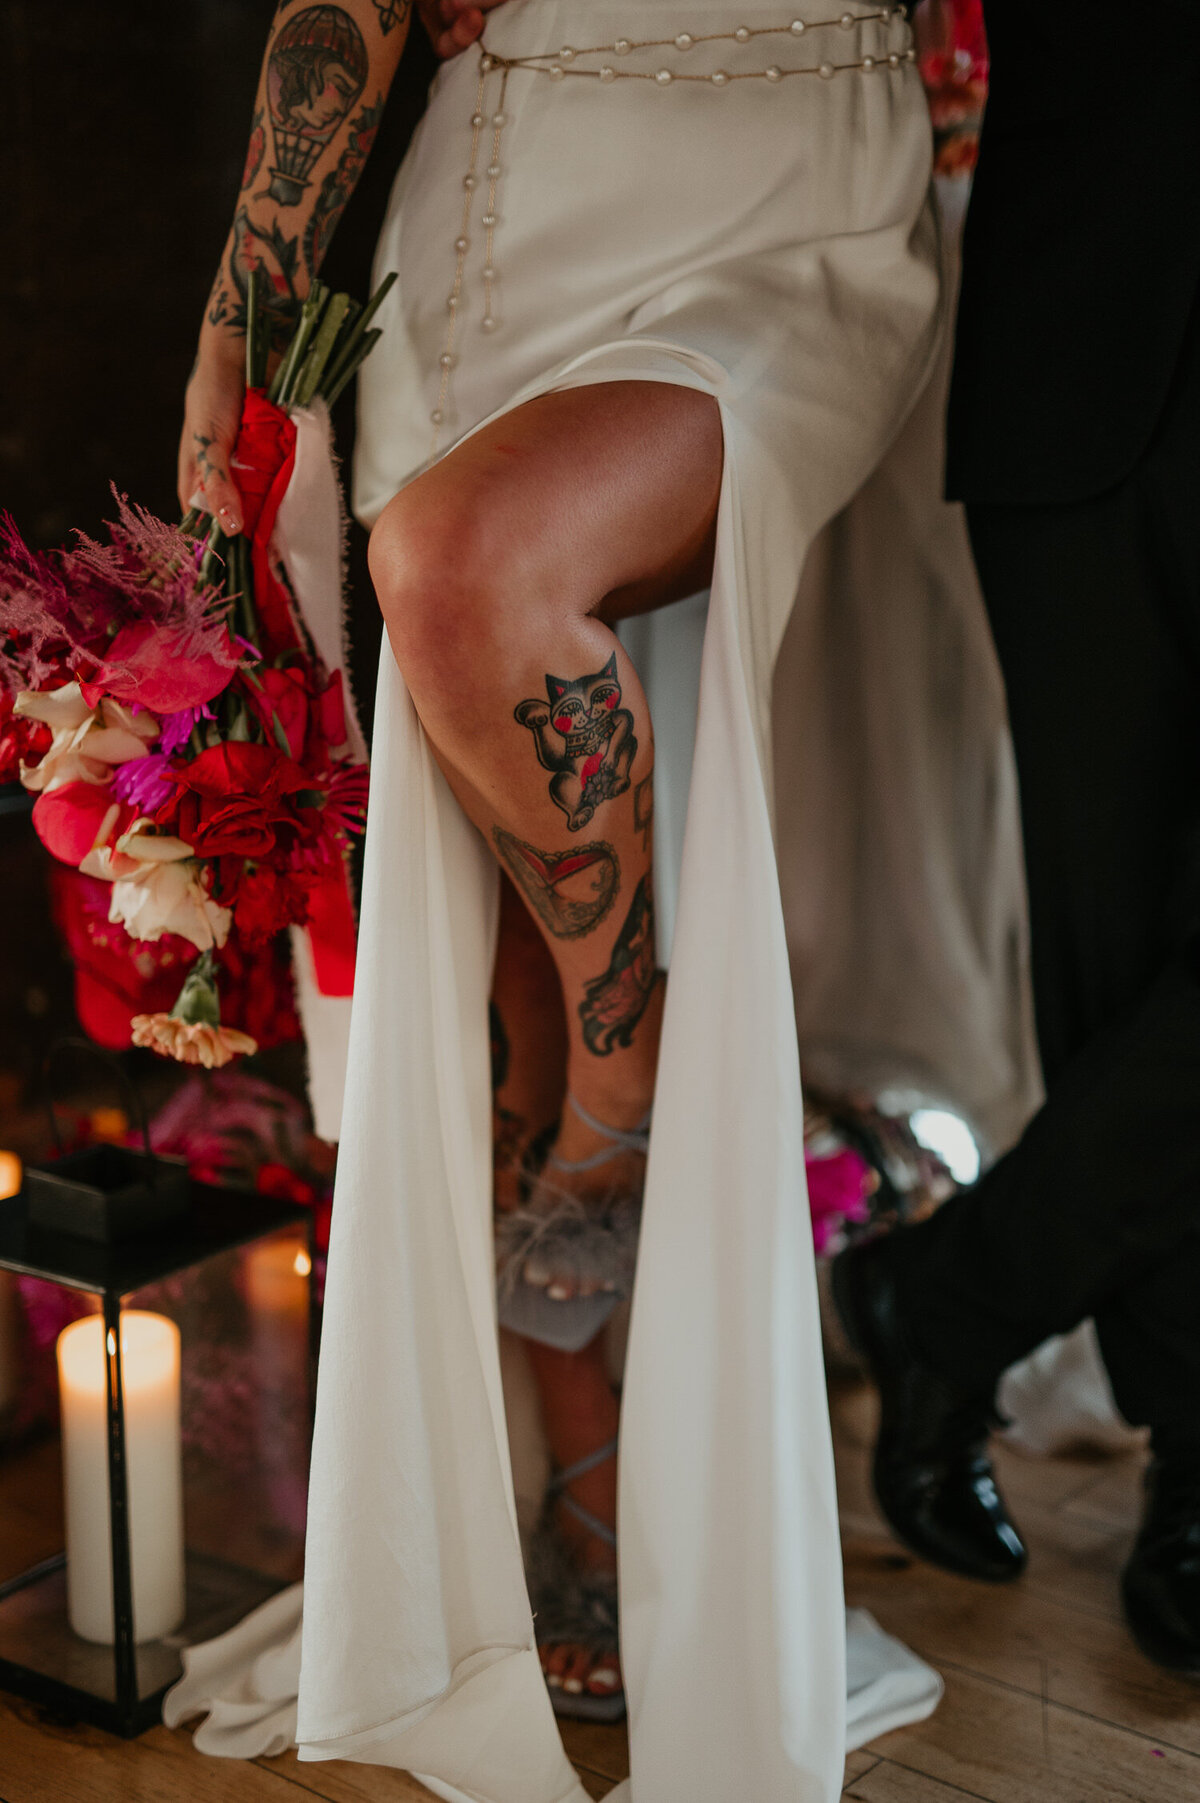 Details of a brides tattoos on her leg as they slip out of her wedding dress. She is holding a stunning pink bouquet.